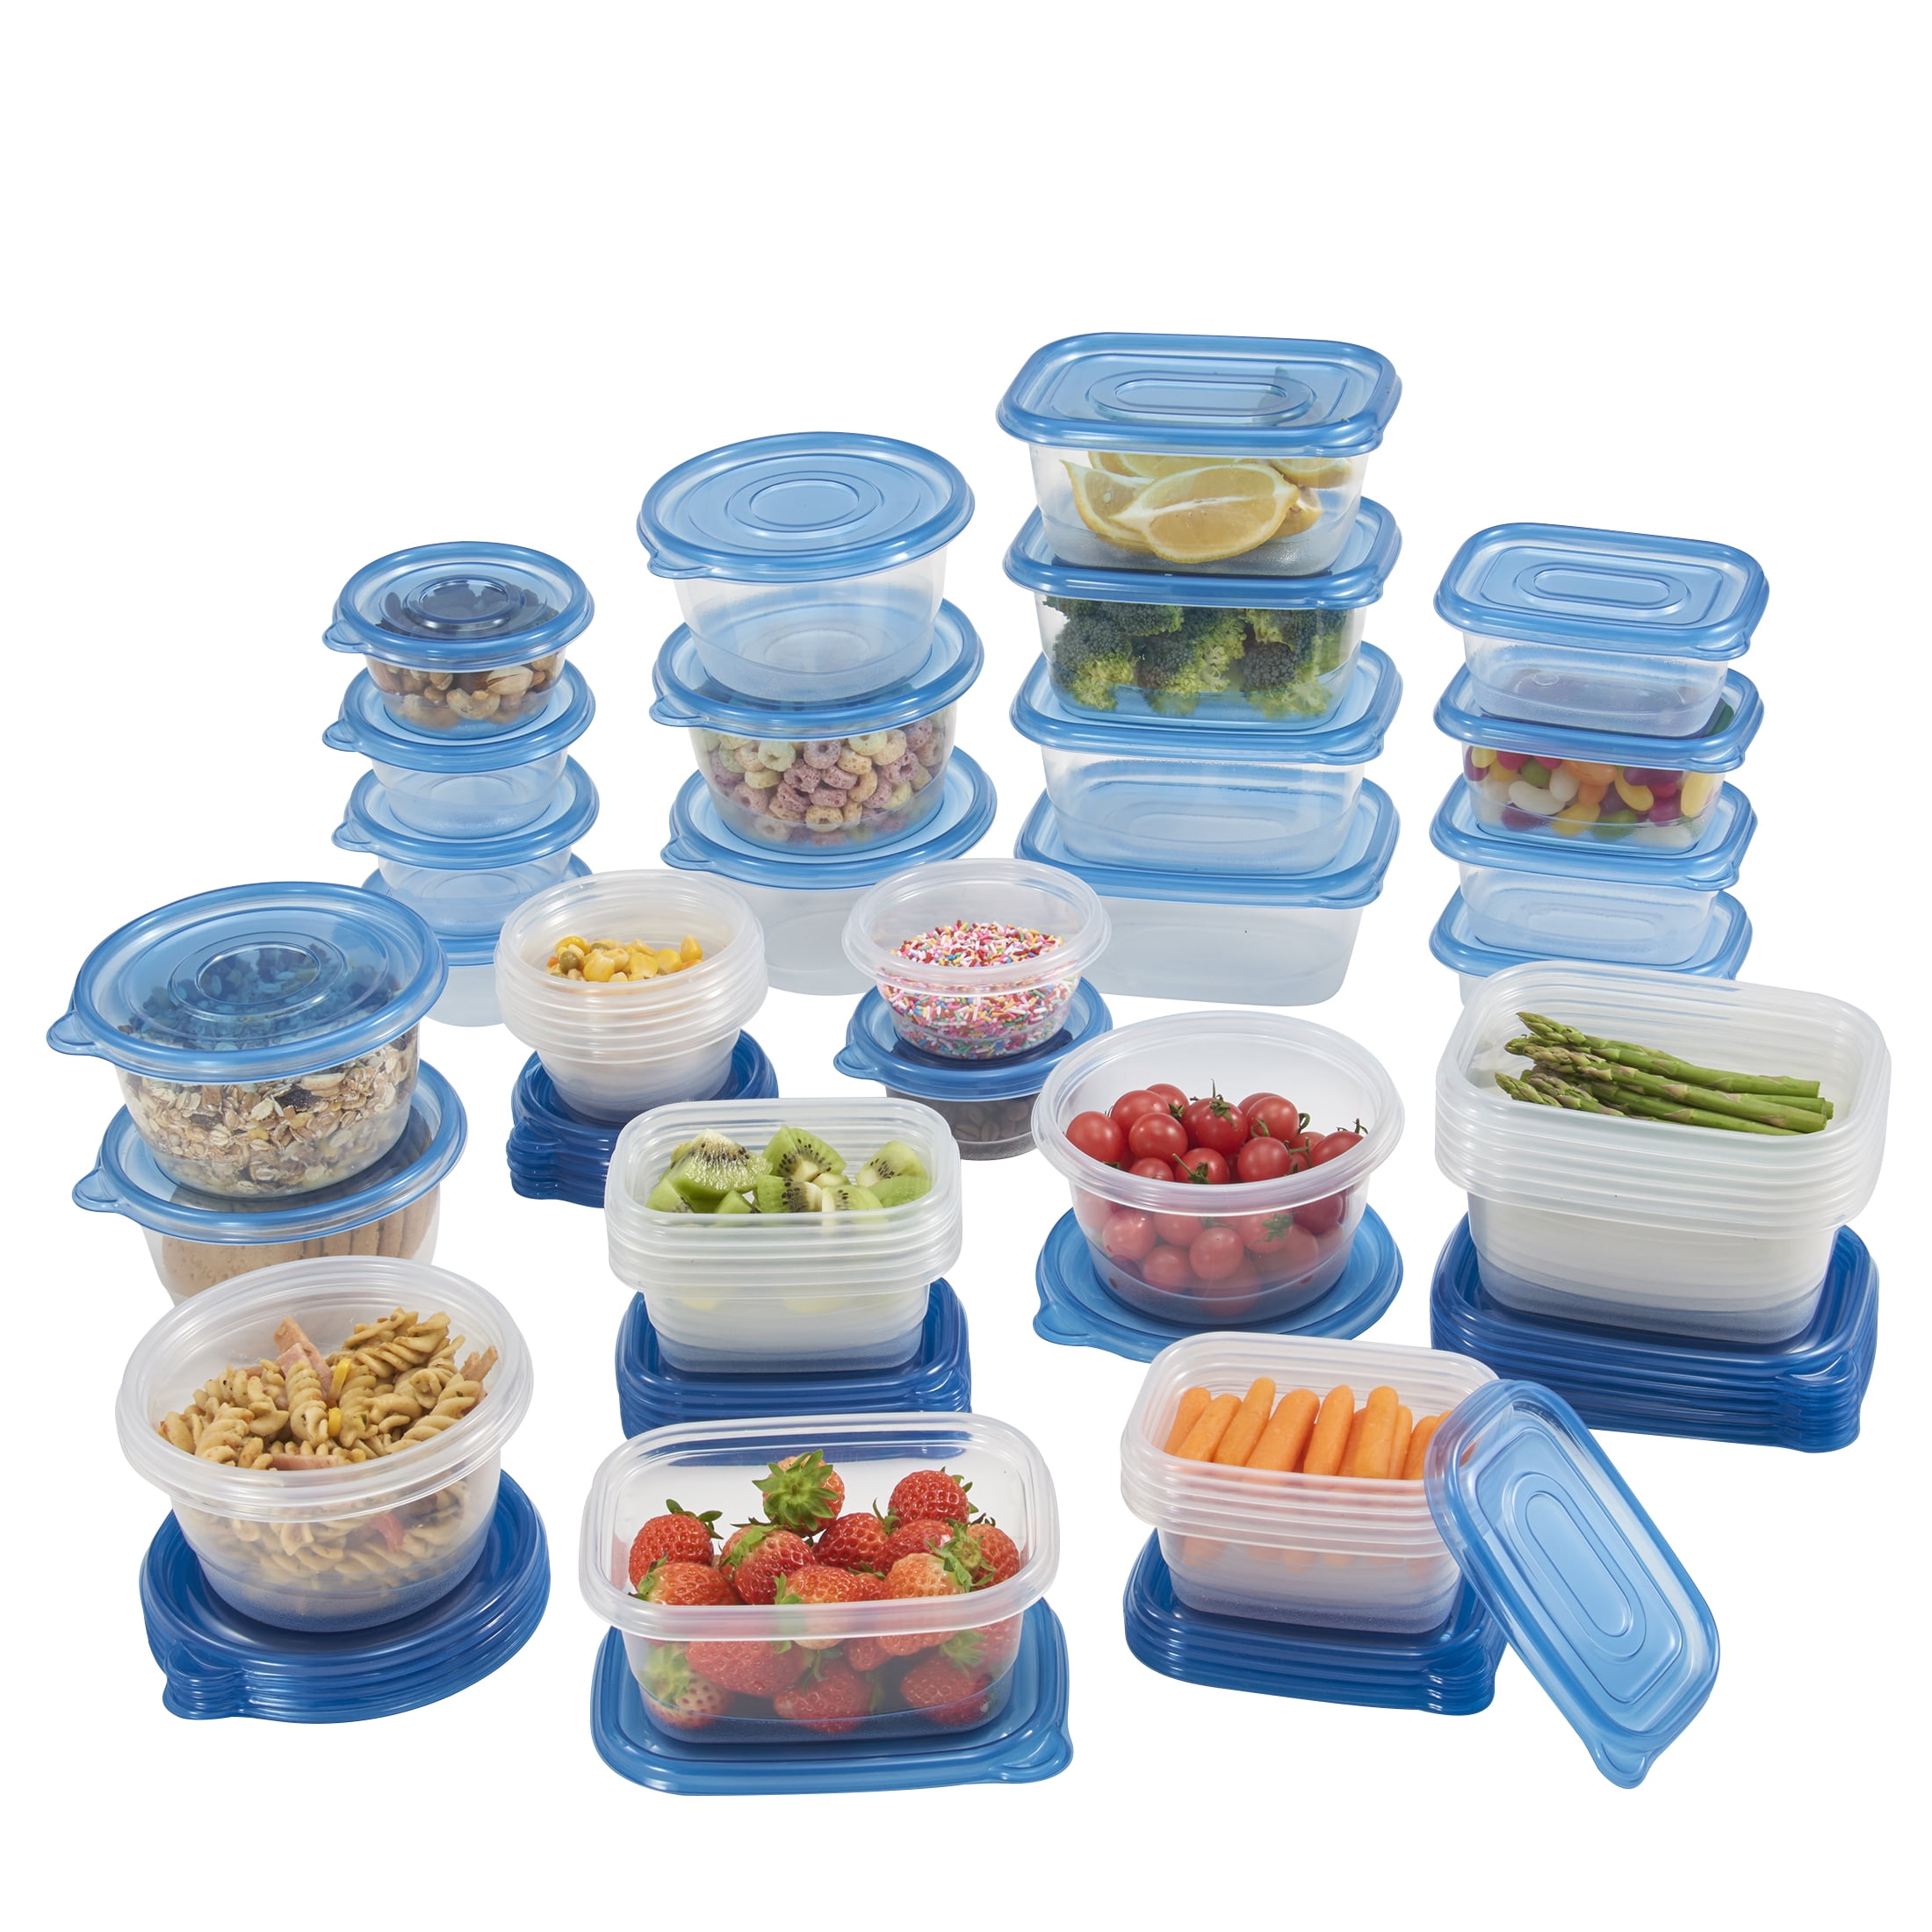 Mainstays Sandwich Container - 8 pack